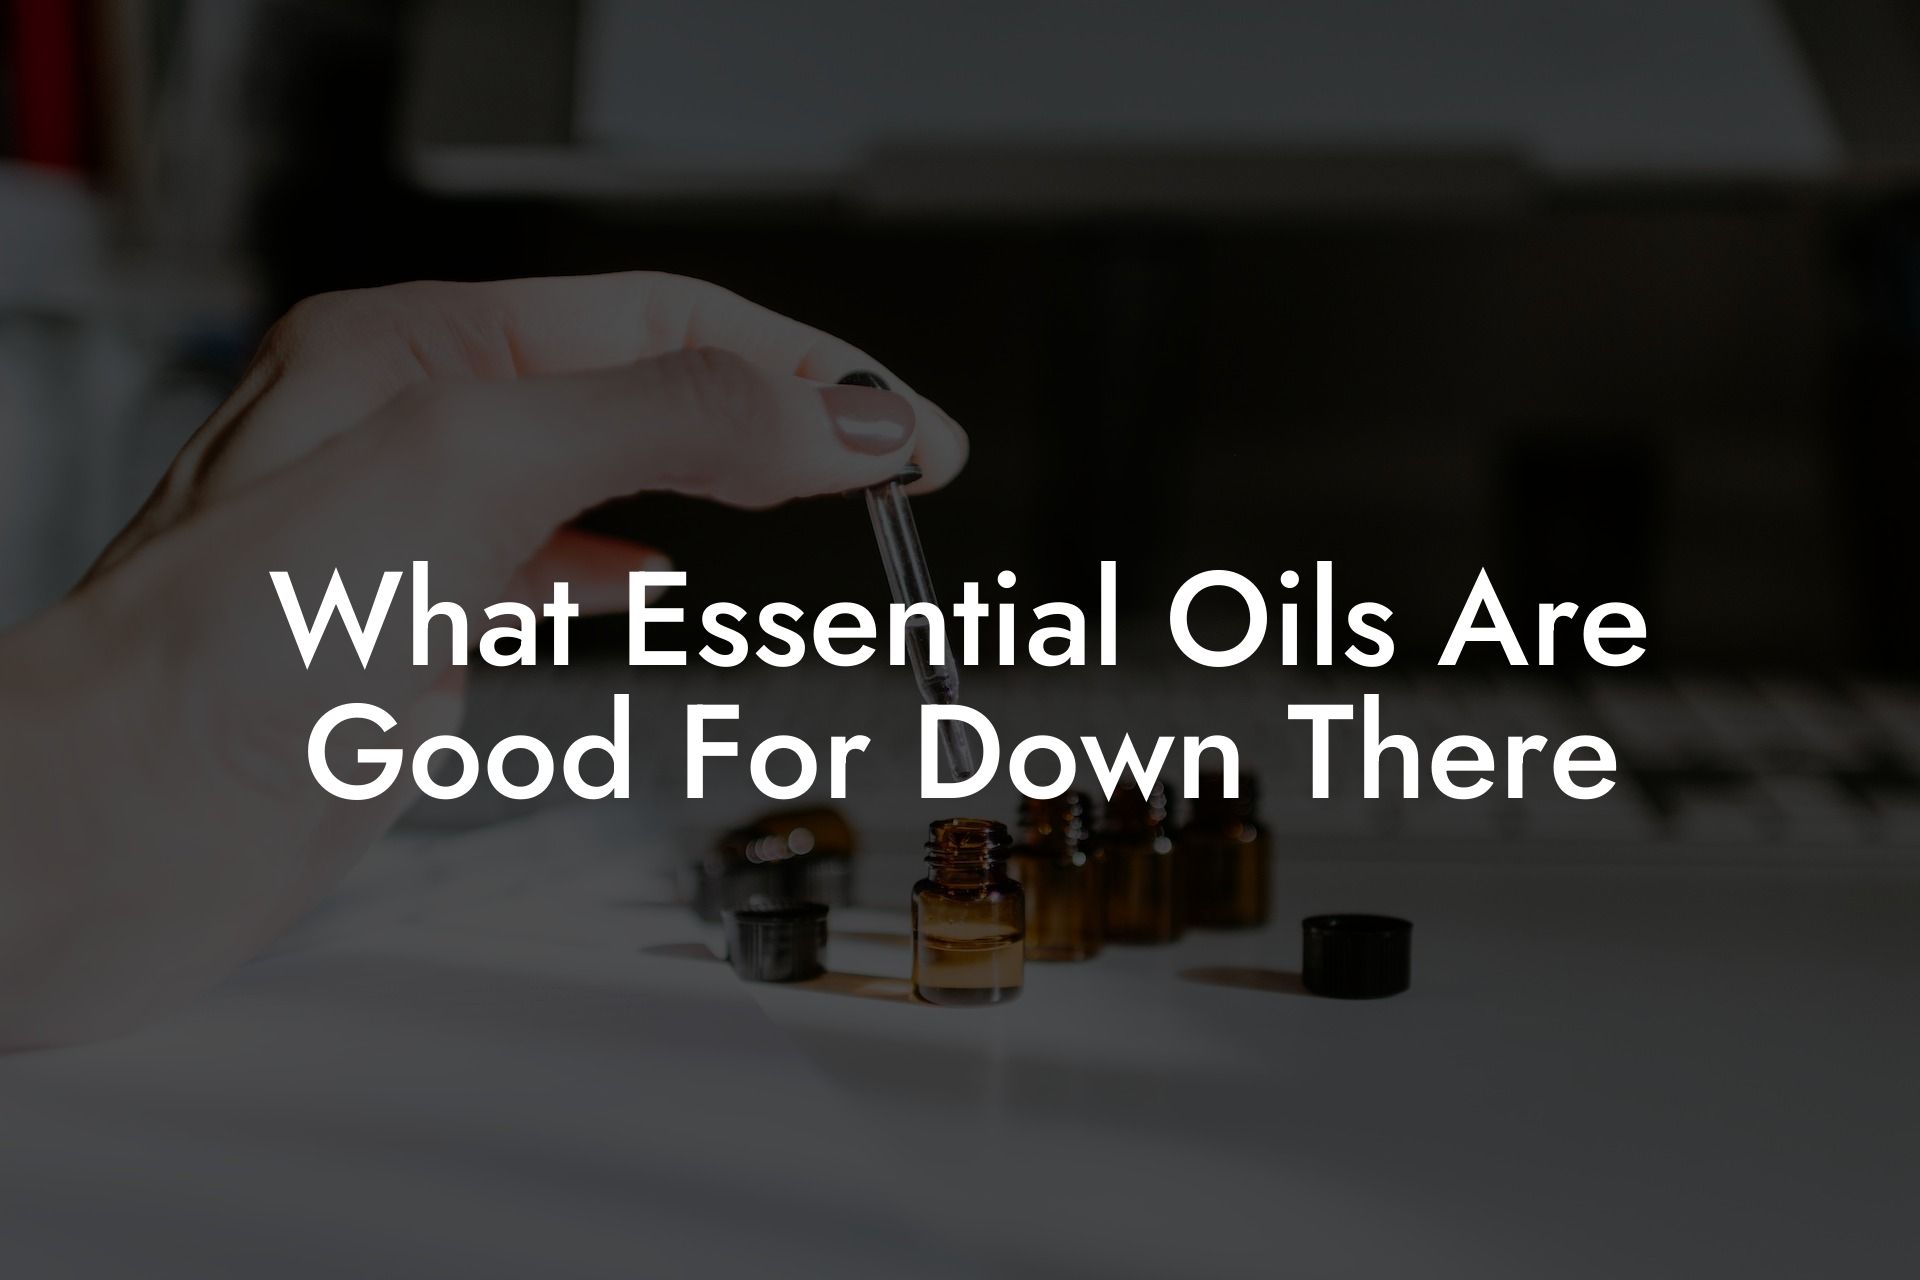 What Essential Oils Are Good For Down There